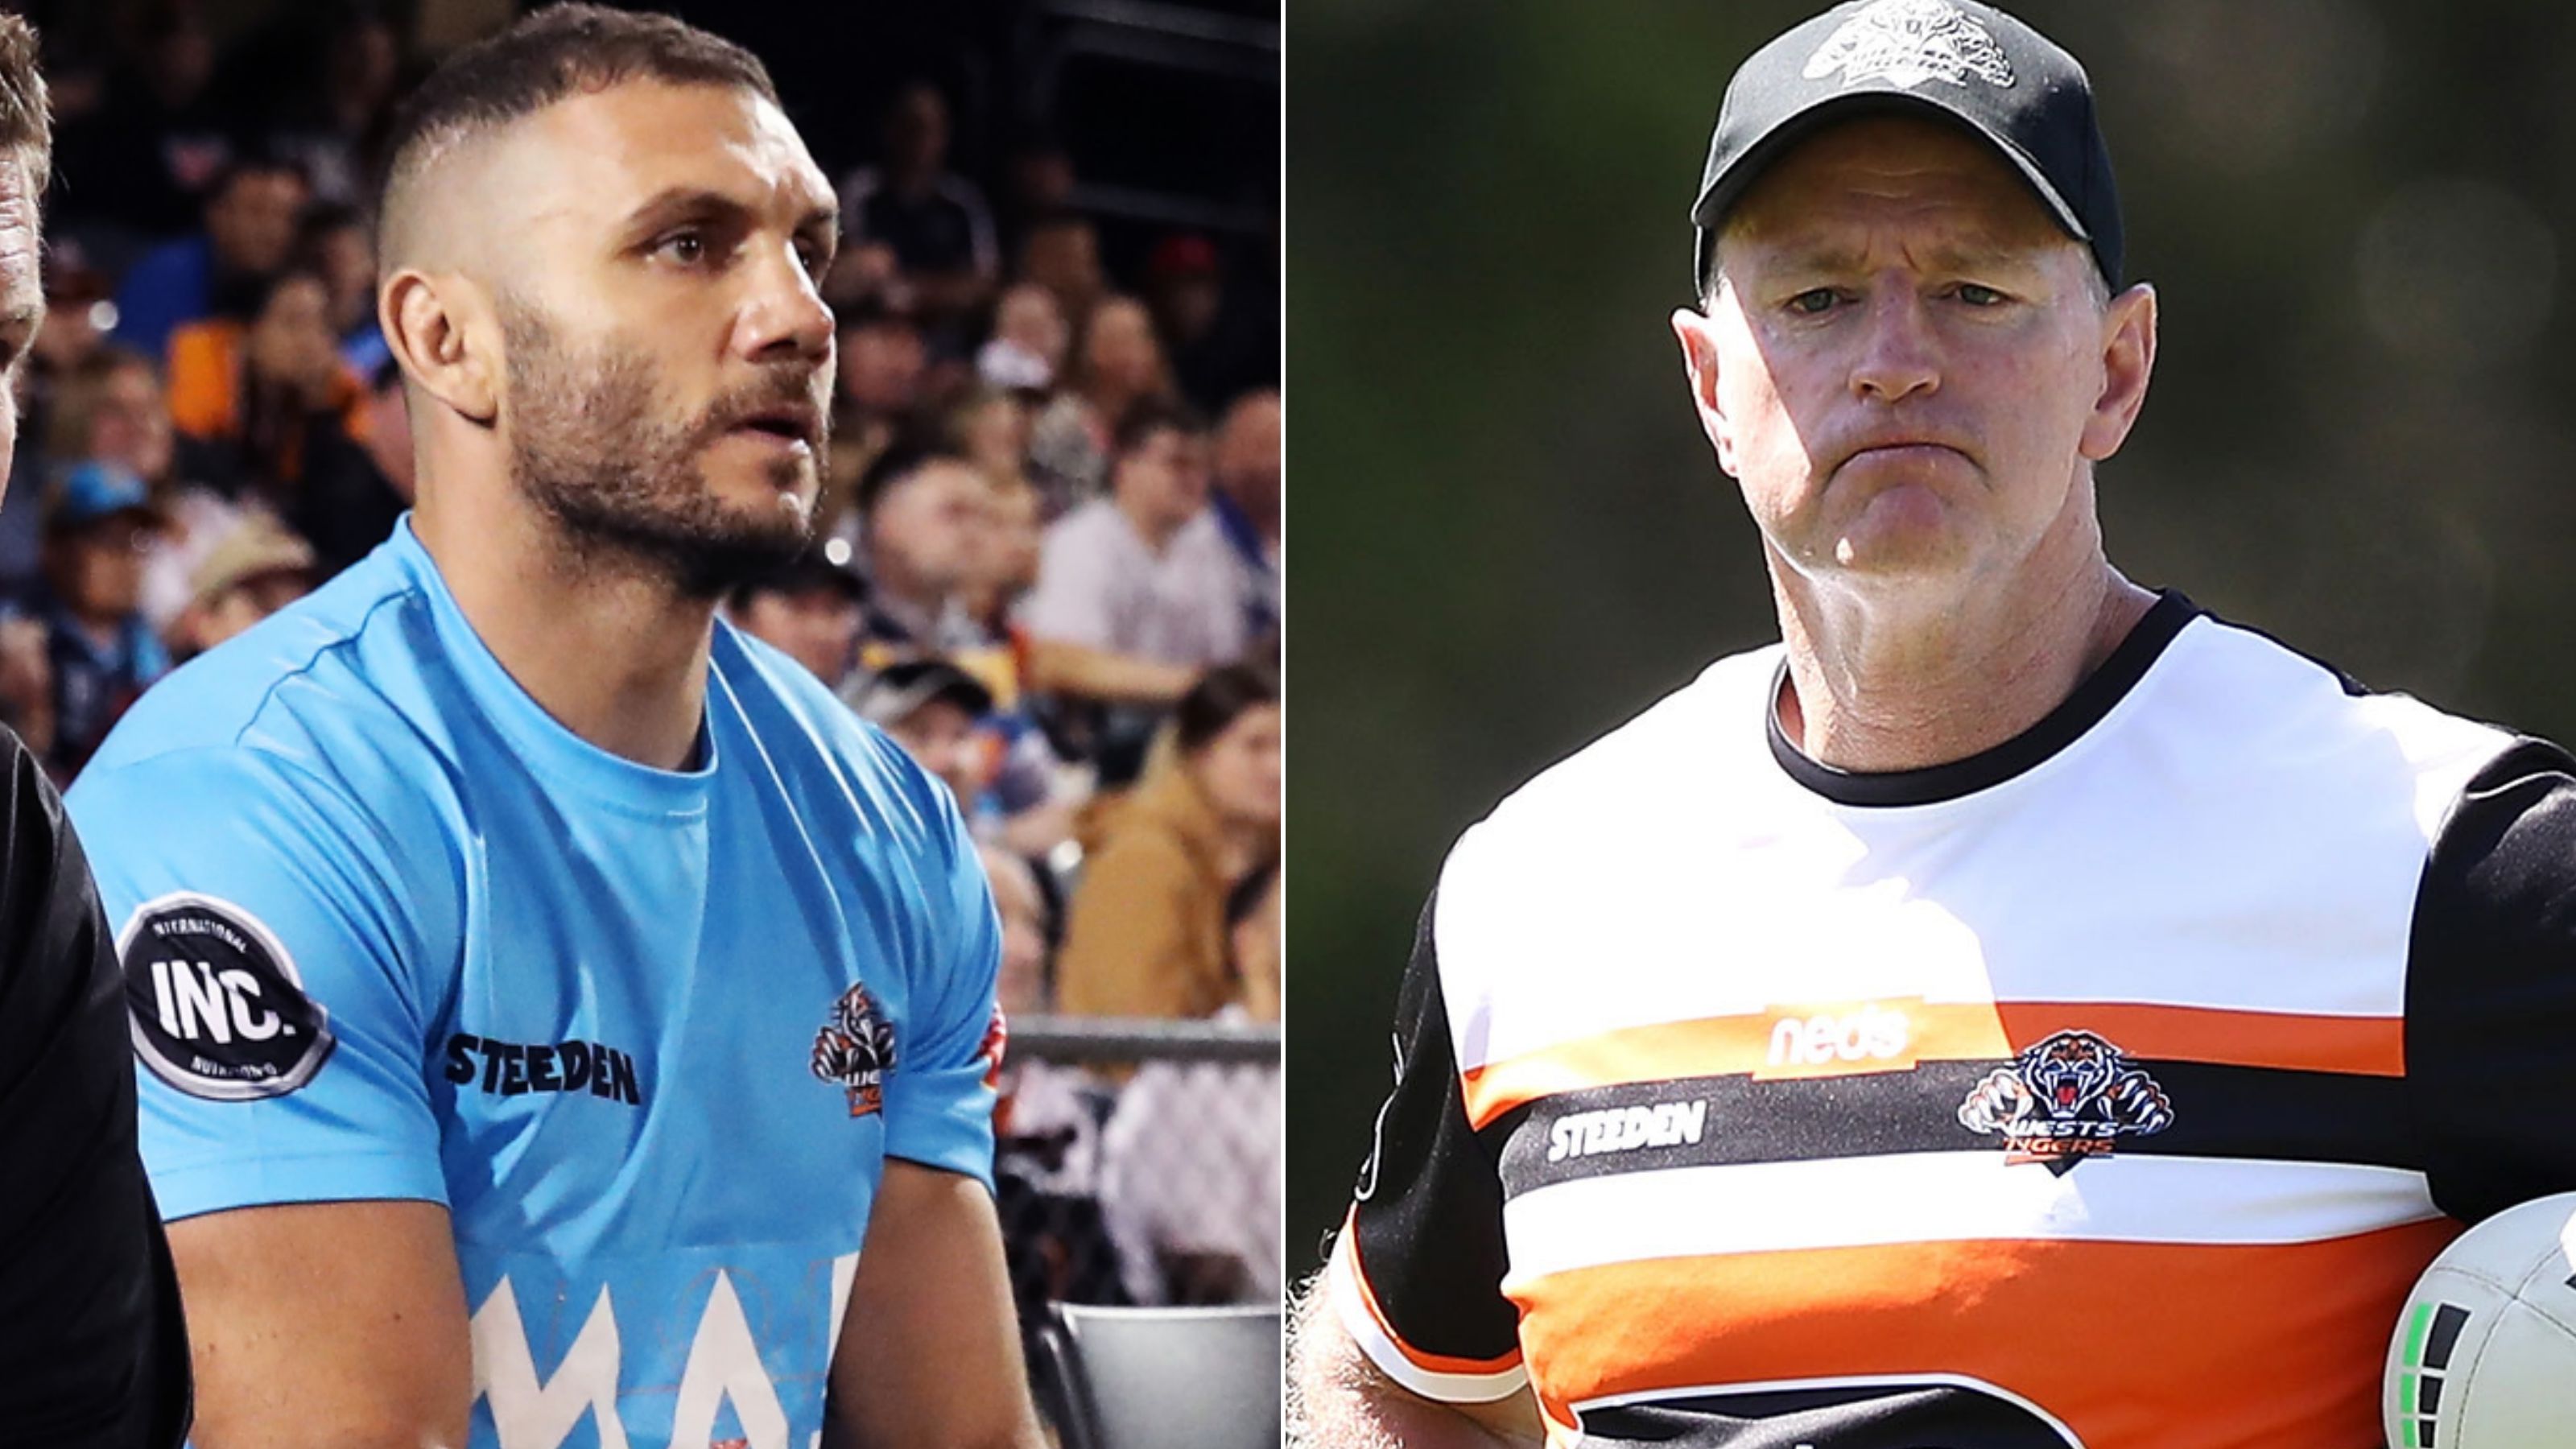 Wests Tigers coach Michael Maguire responds to rumours of a rift with Robbie Farah